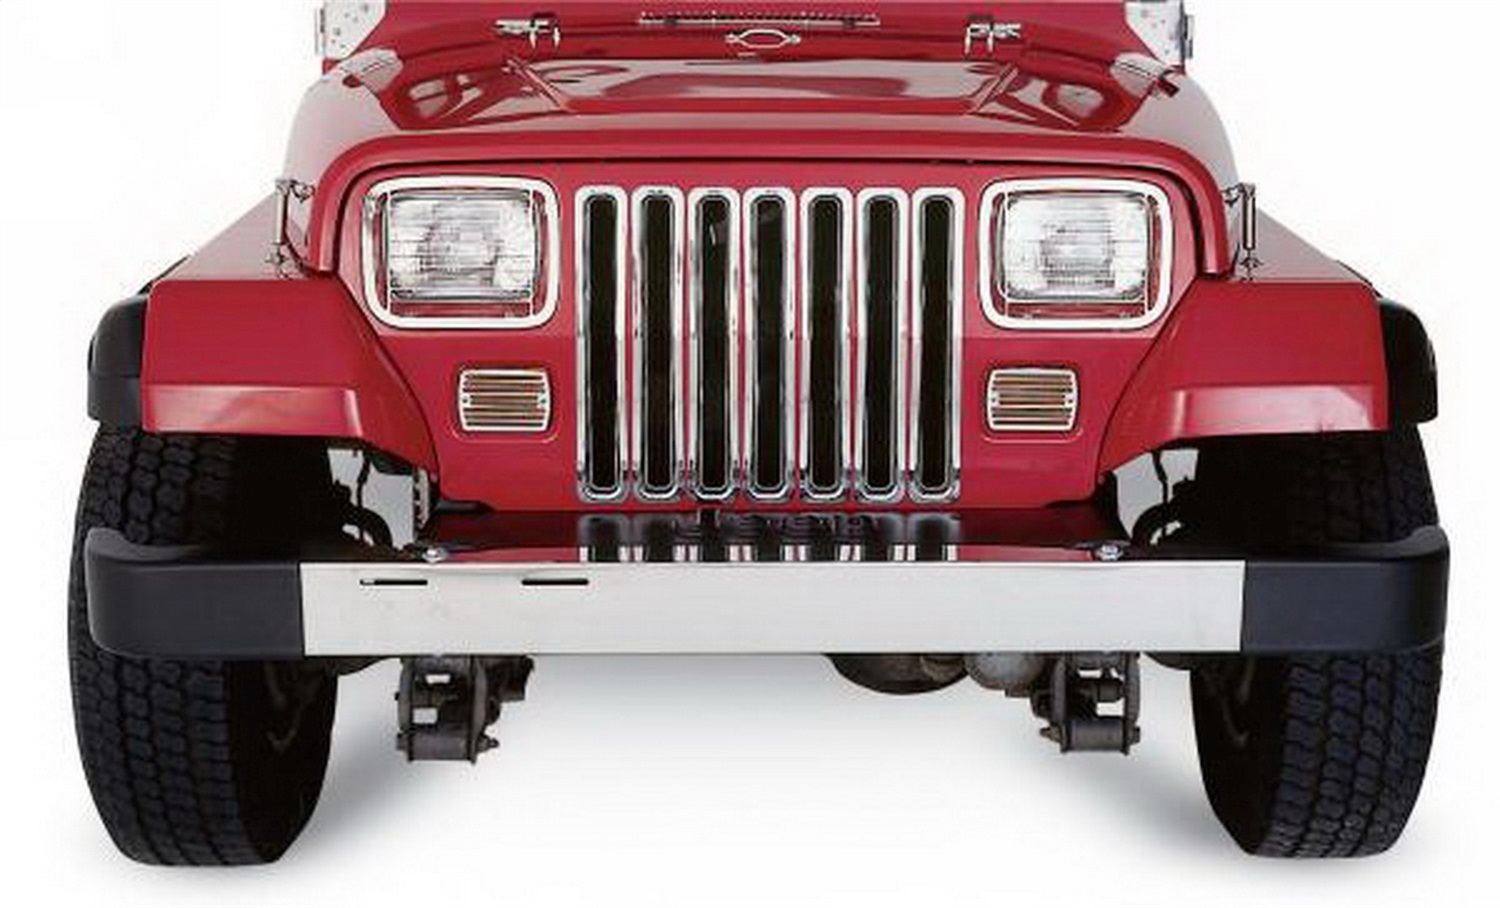 Rampage Grille Inserts | Steel, Chrome | 7511 | Fits 1997-2006 Jeep Wrangler TJ